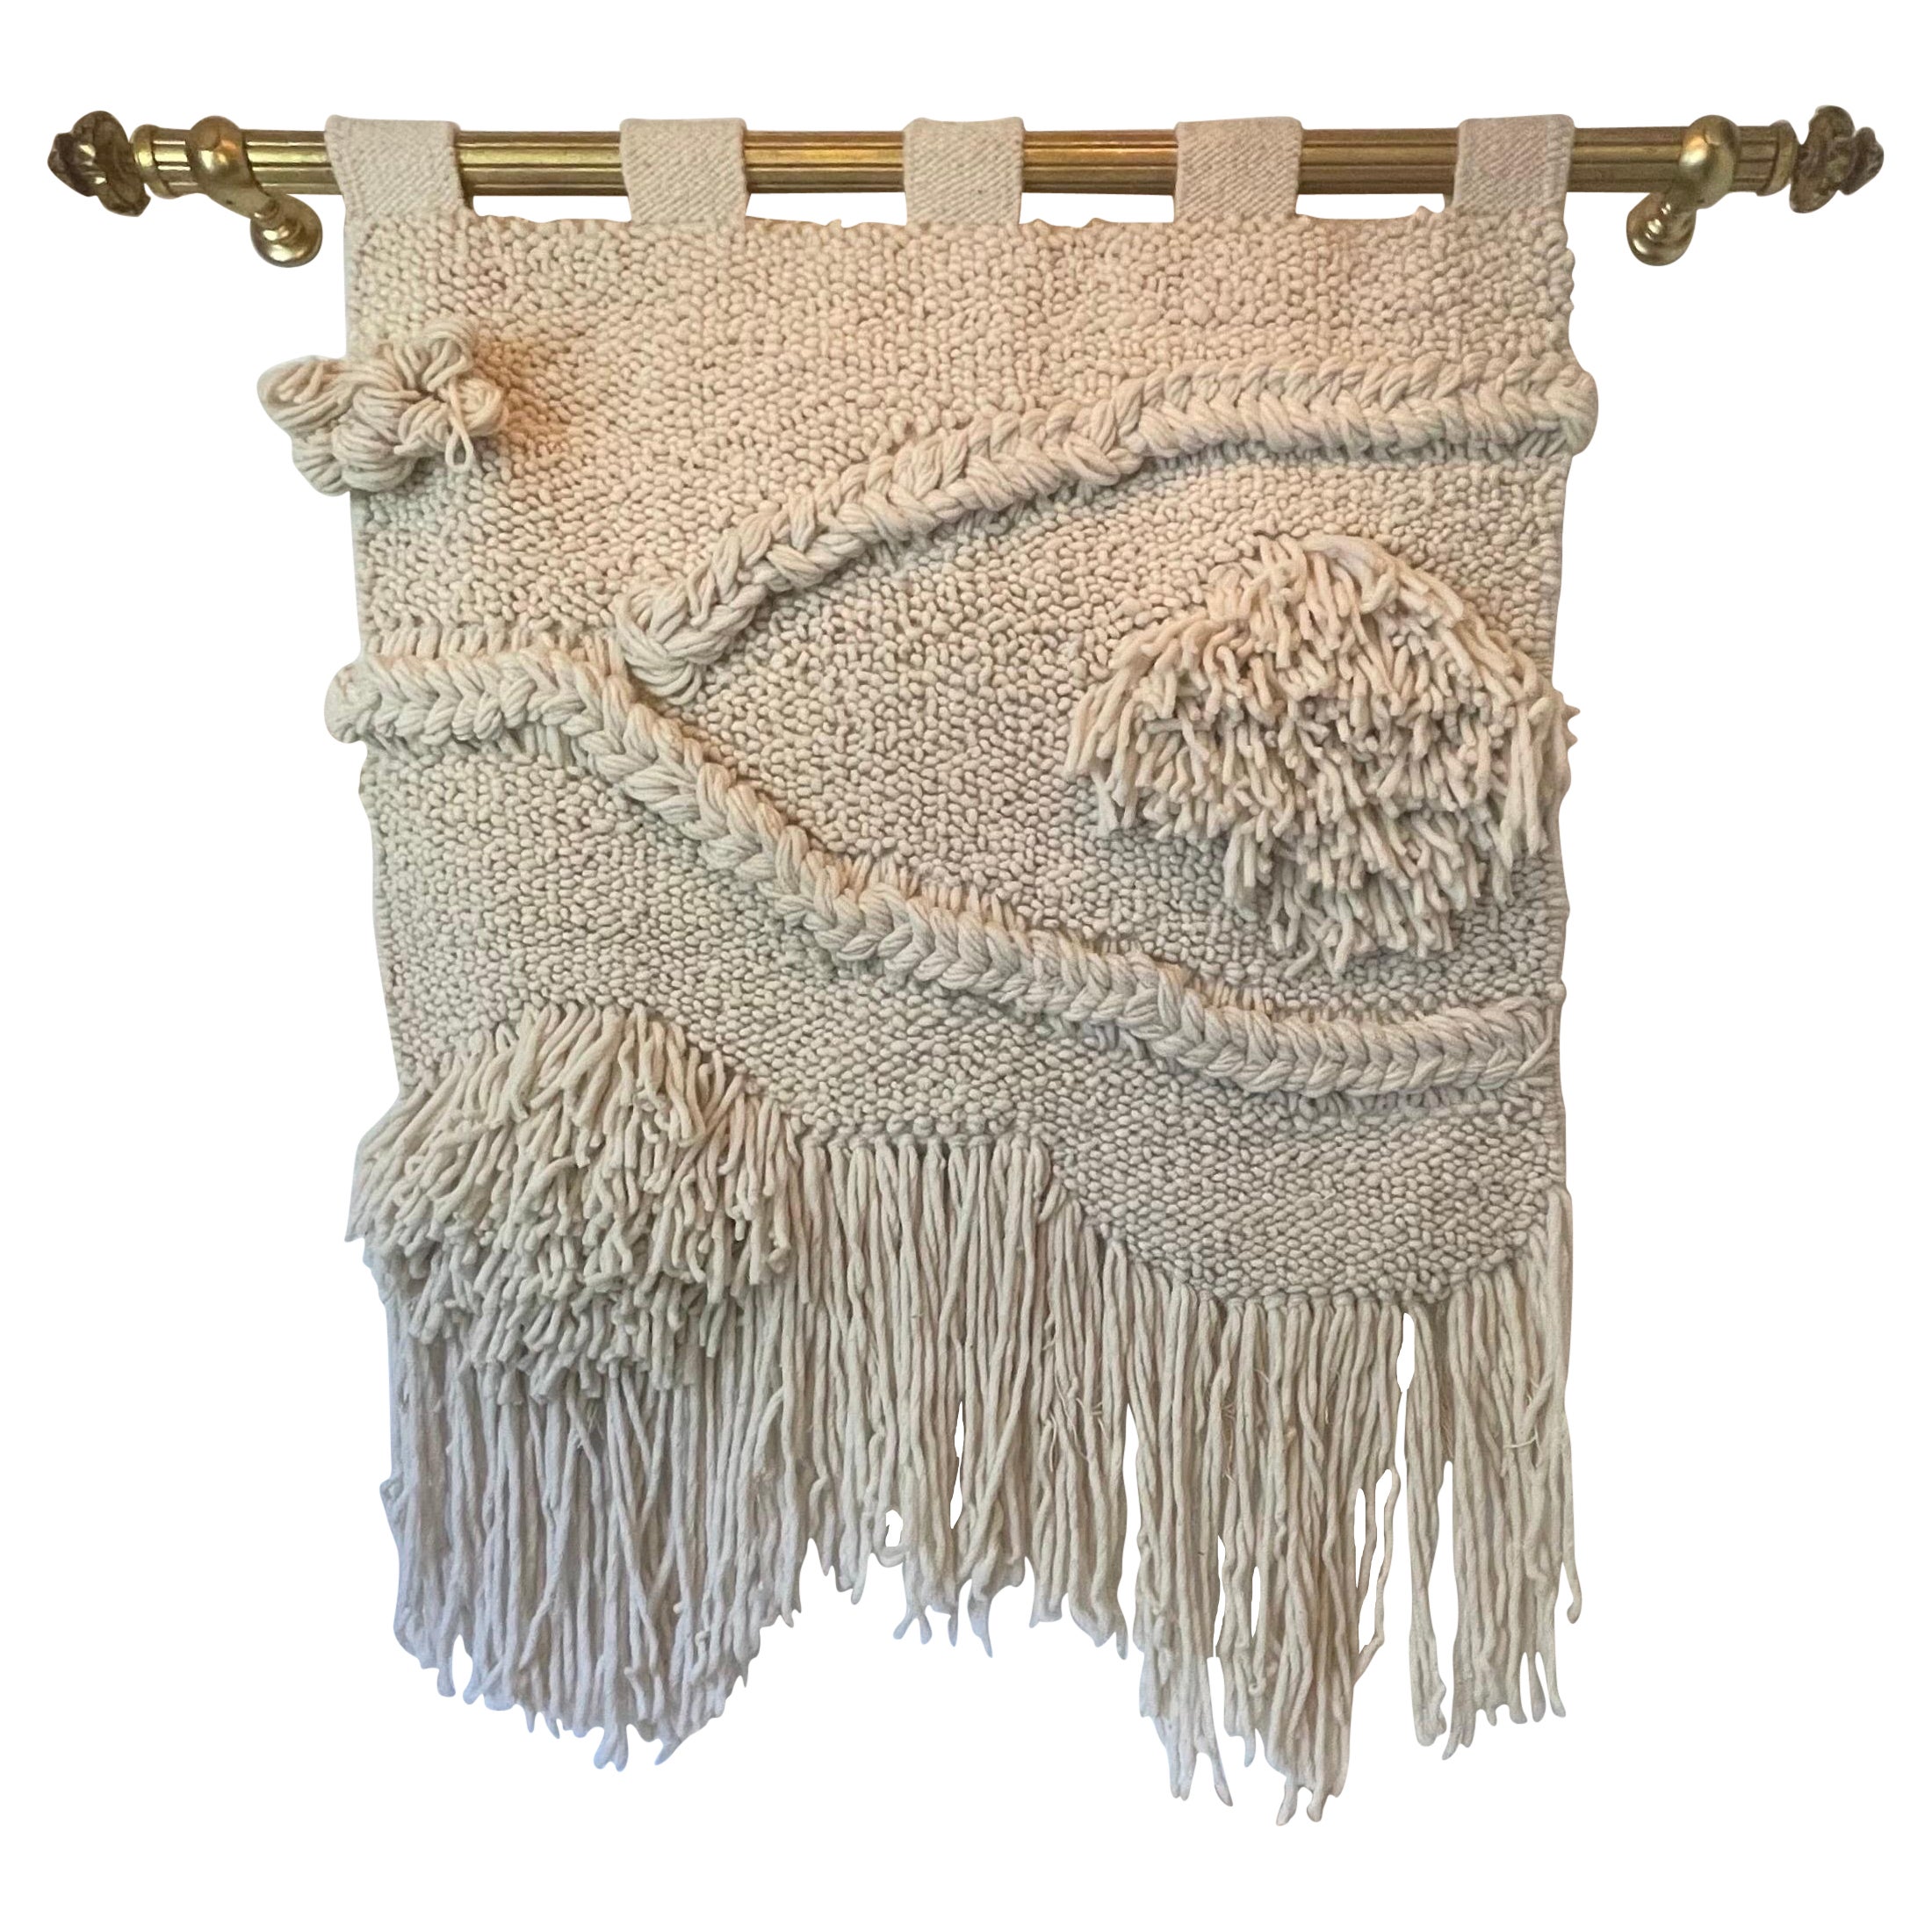 100% Natural Handwoven Wool Tapestry/ Wall Art